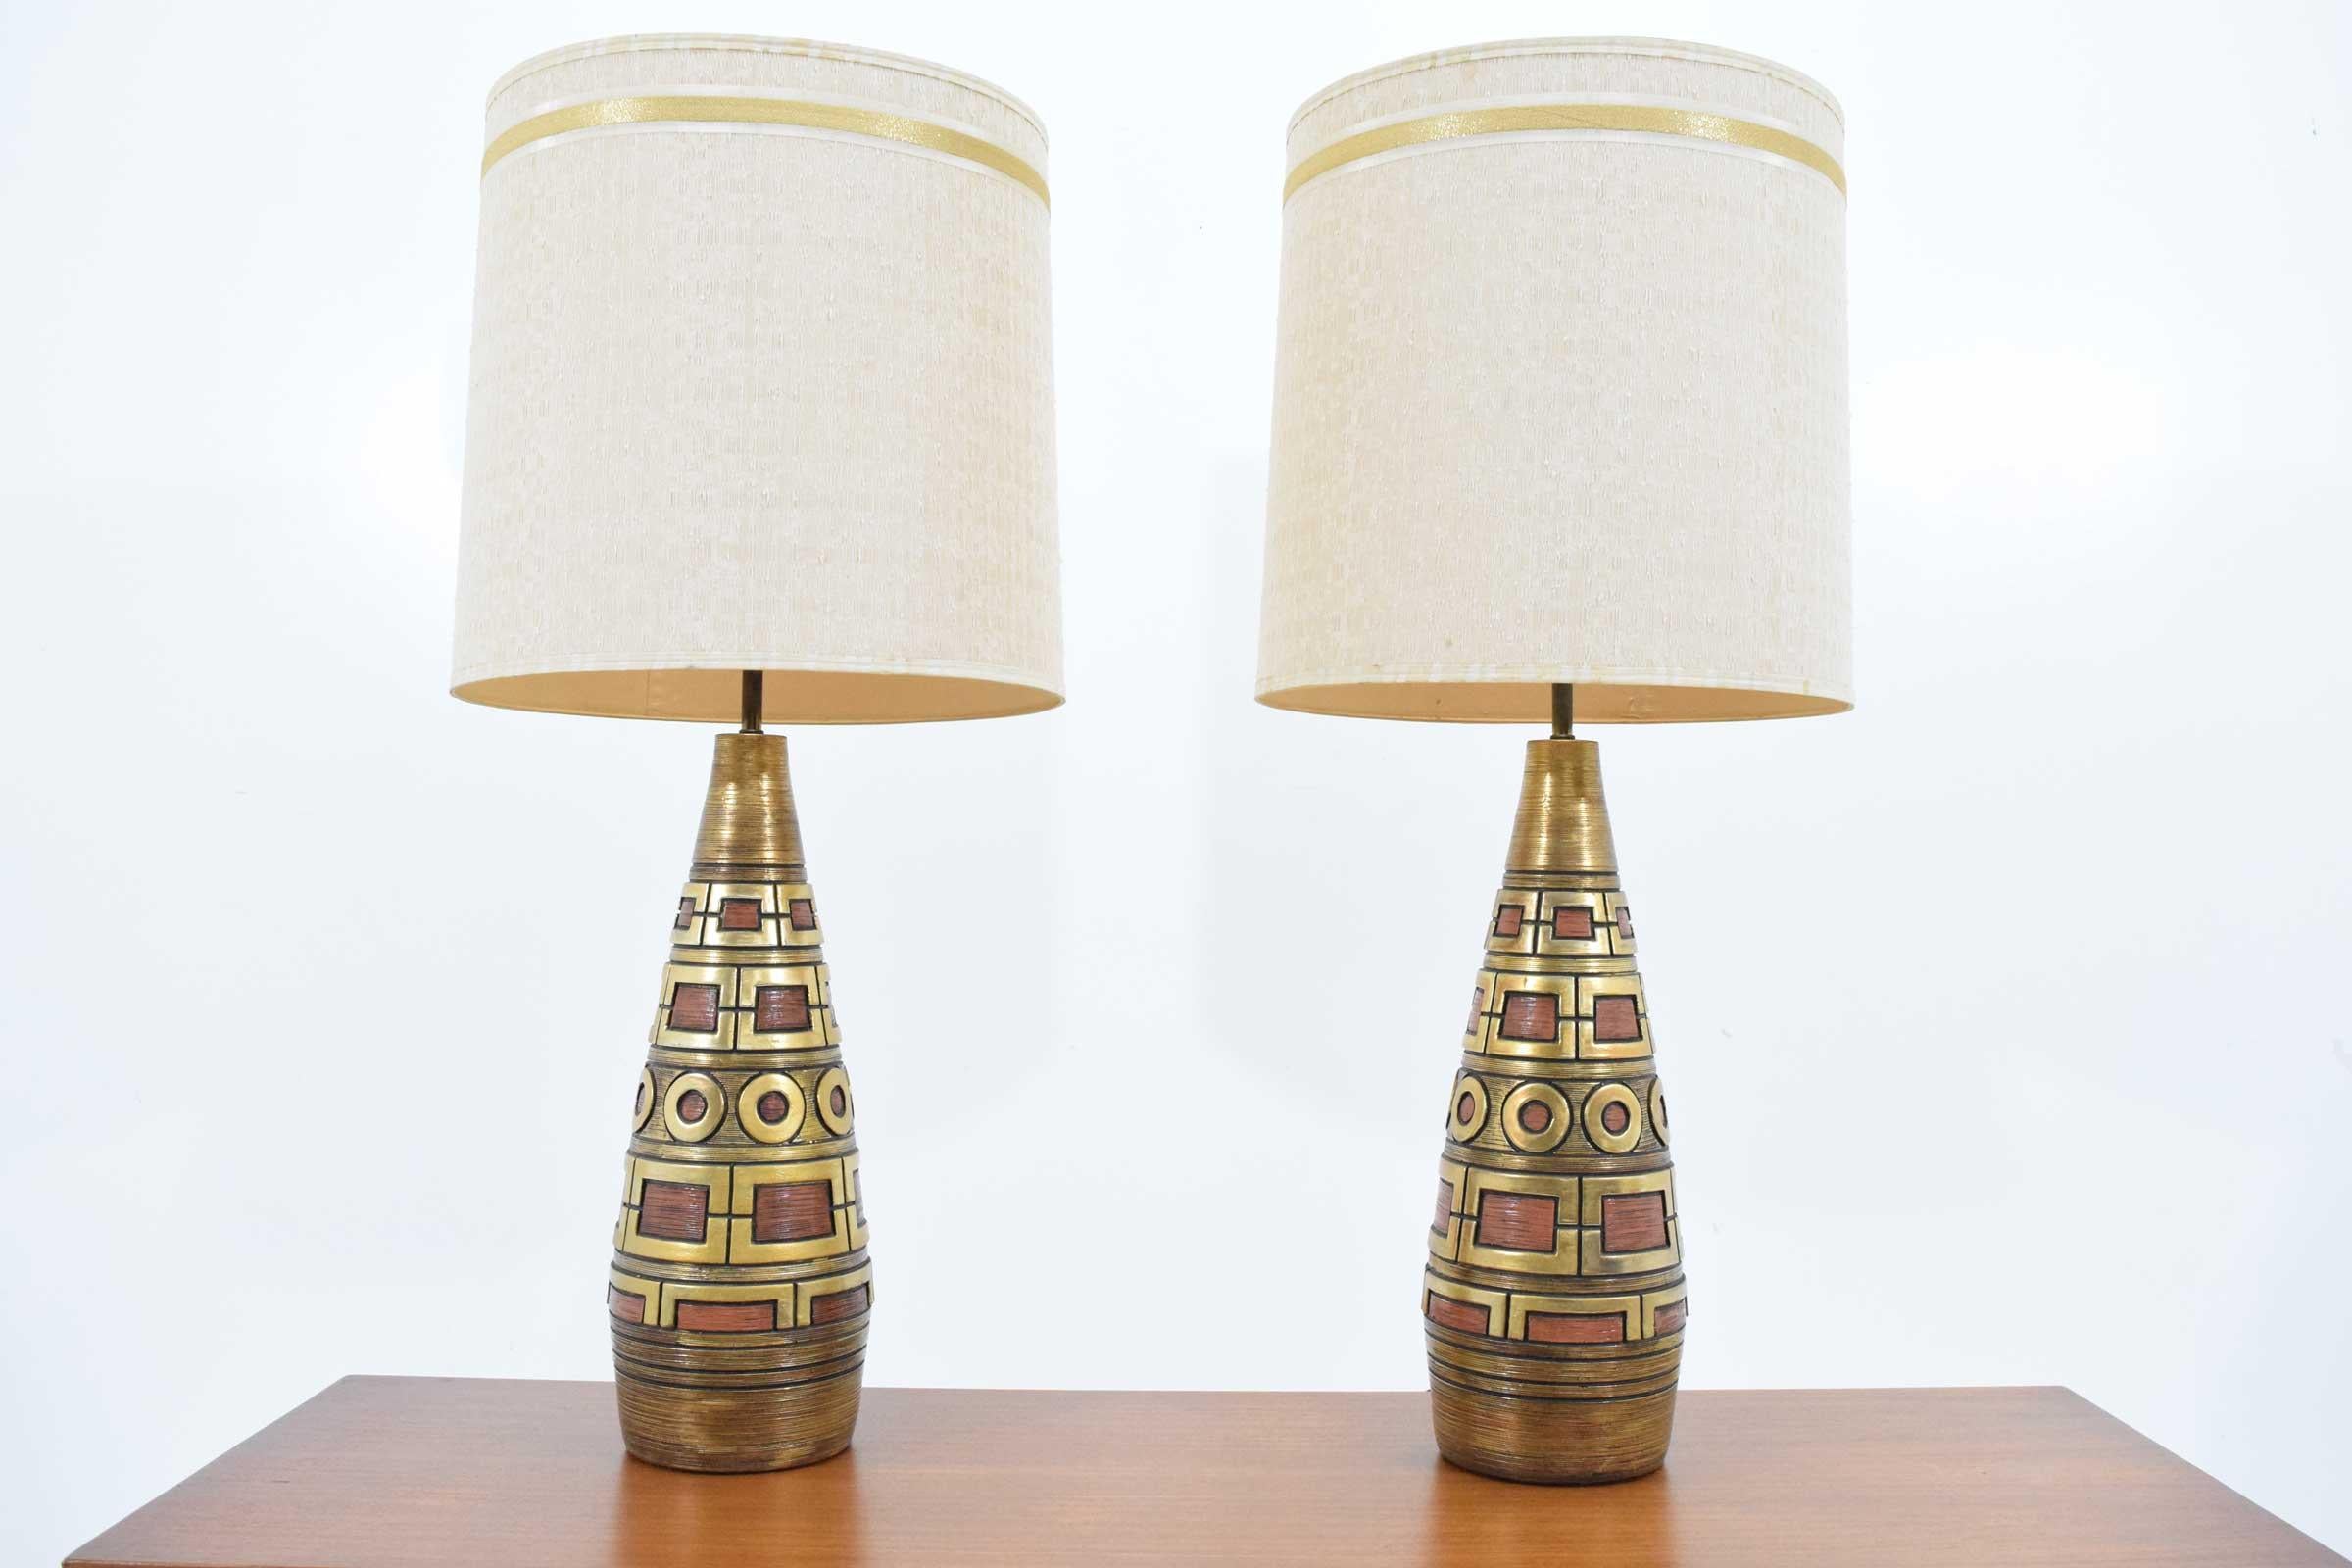 A beautiful pair of lamps by Fortune Lamp Company signed and dated 1959. Lamps are 40.5